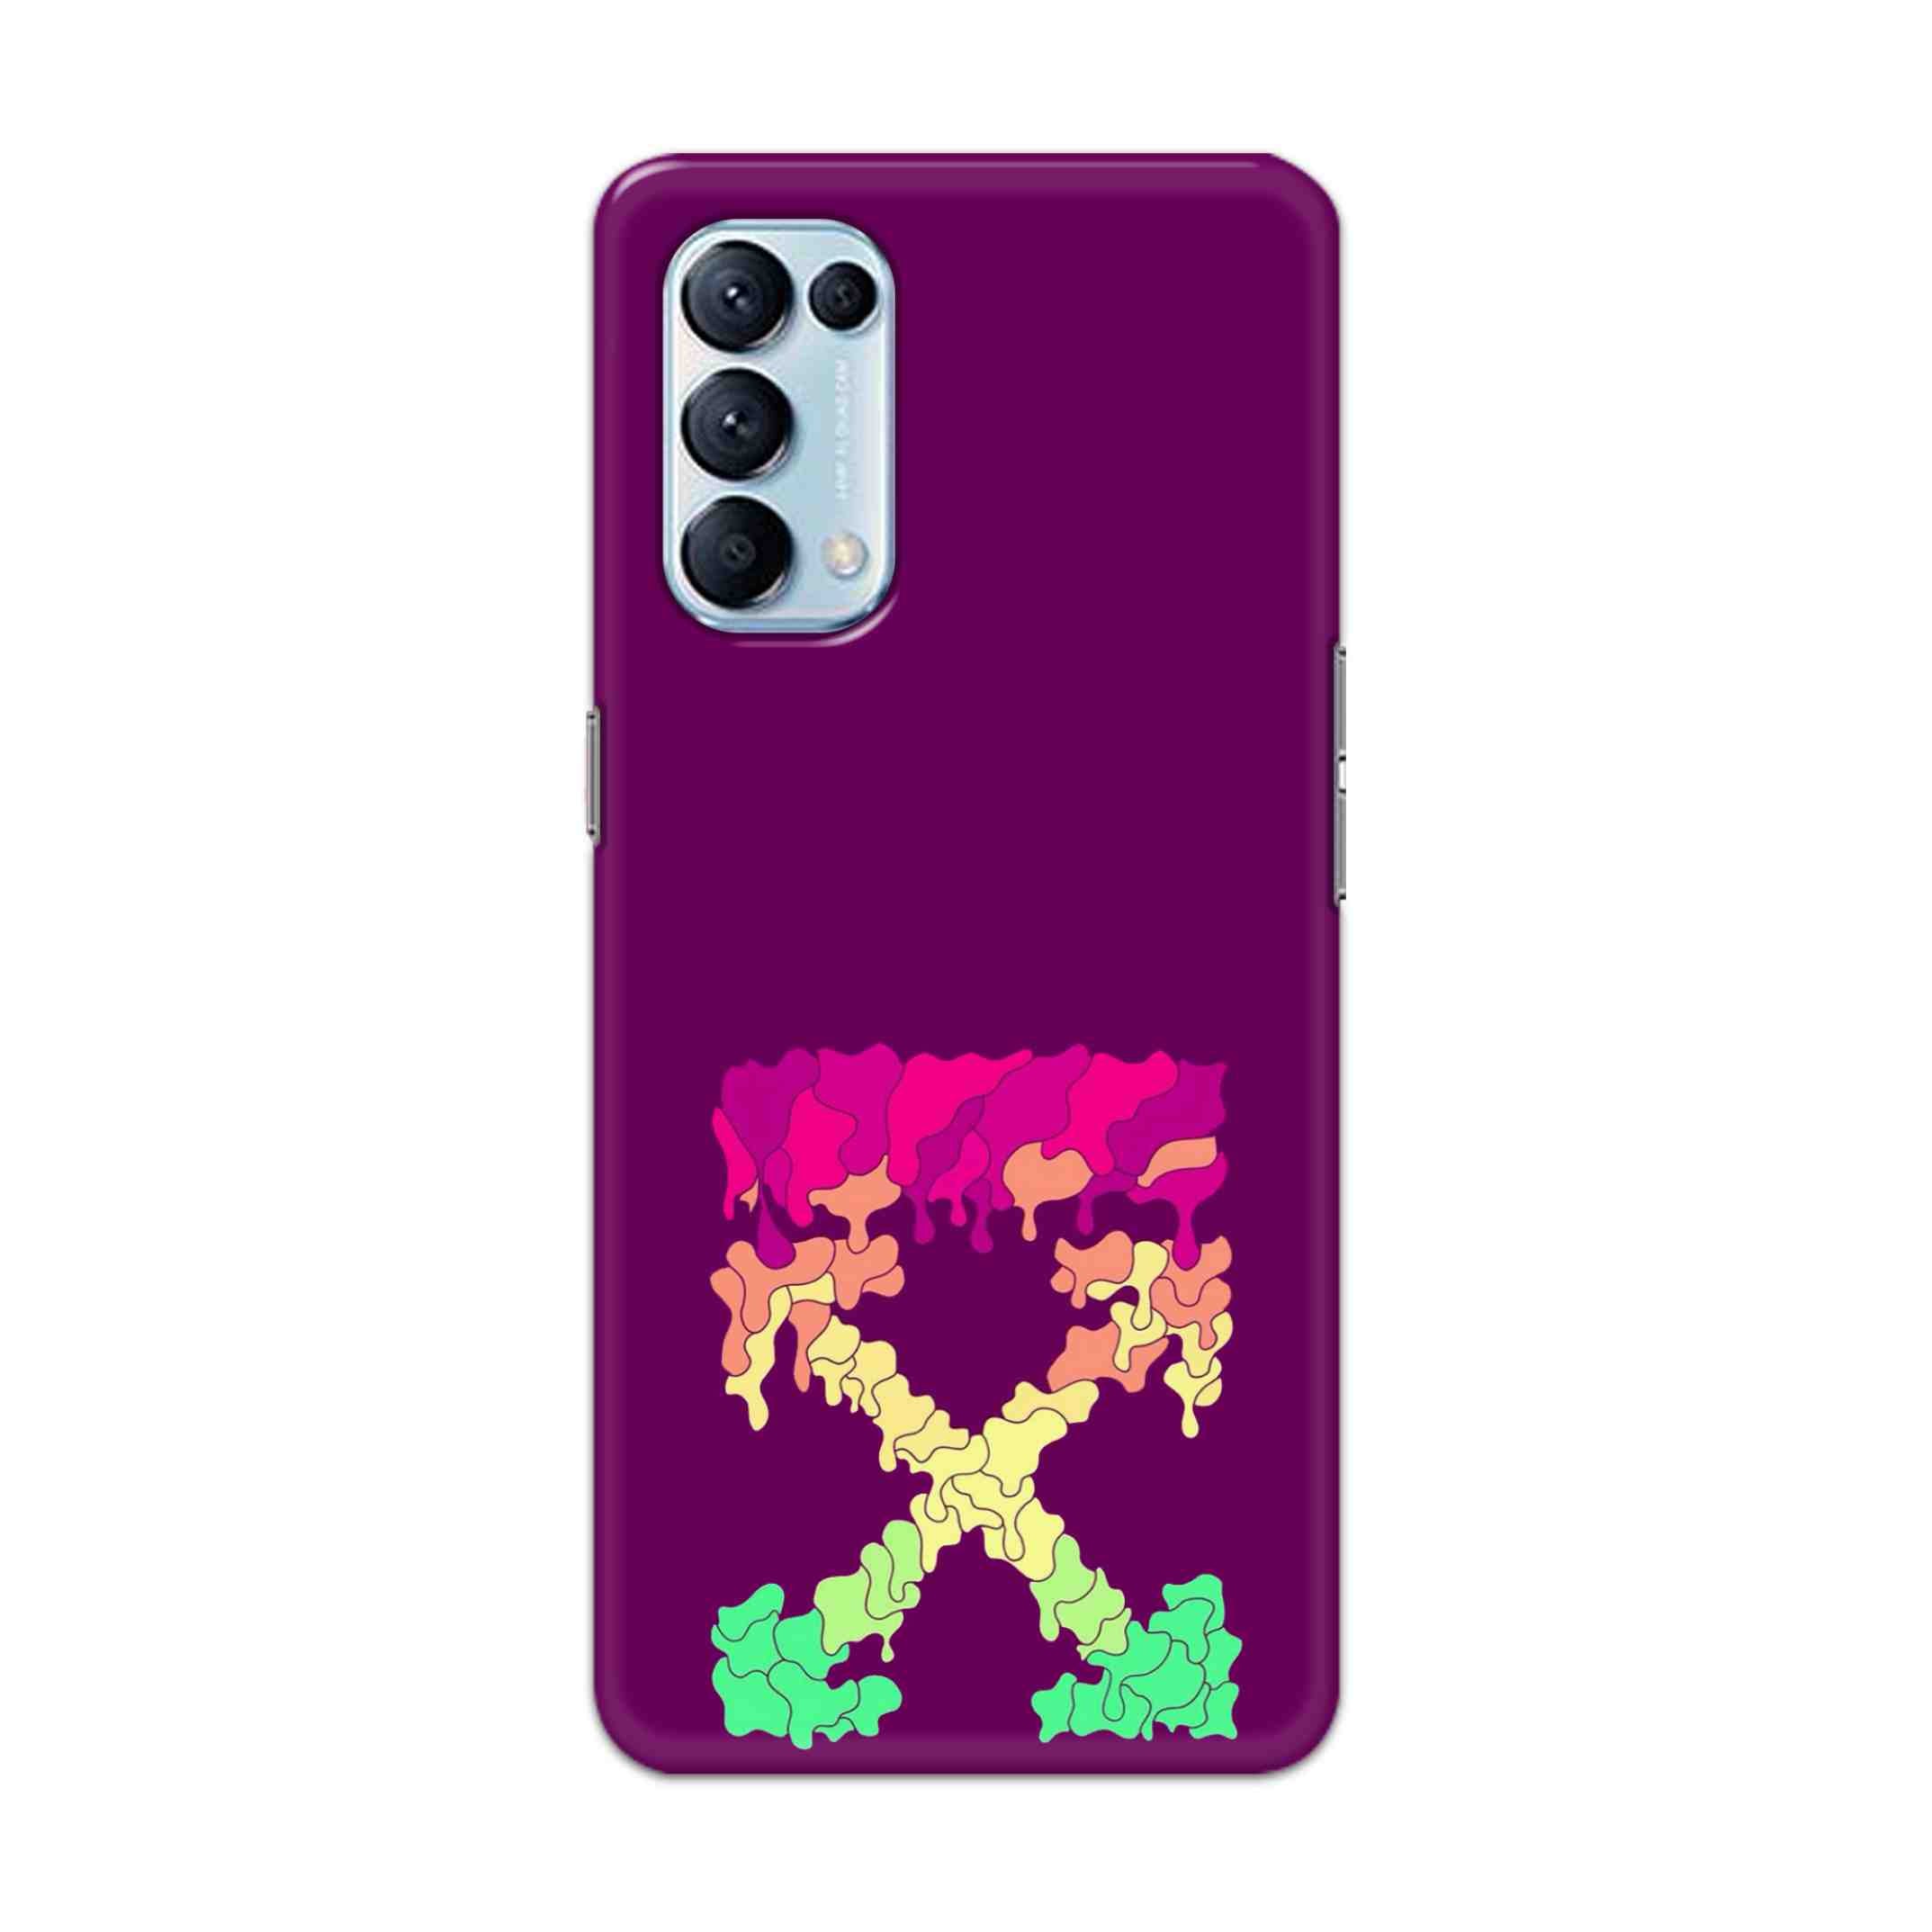 Buy X.O Hard Back Mobile Phone Case Cover For Oppo Reno 5 Pro 5G Online